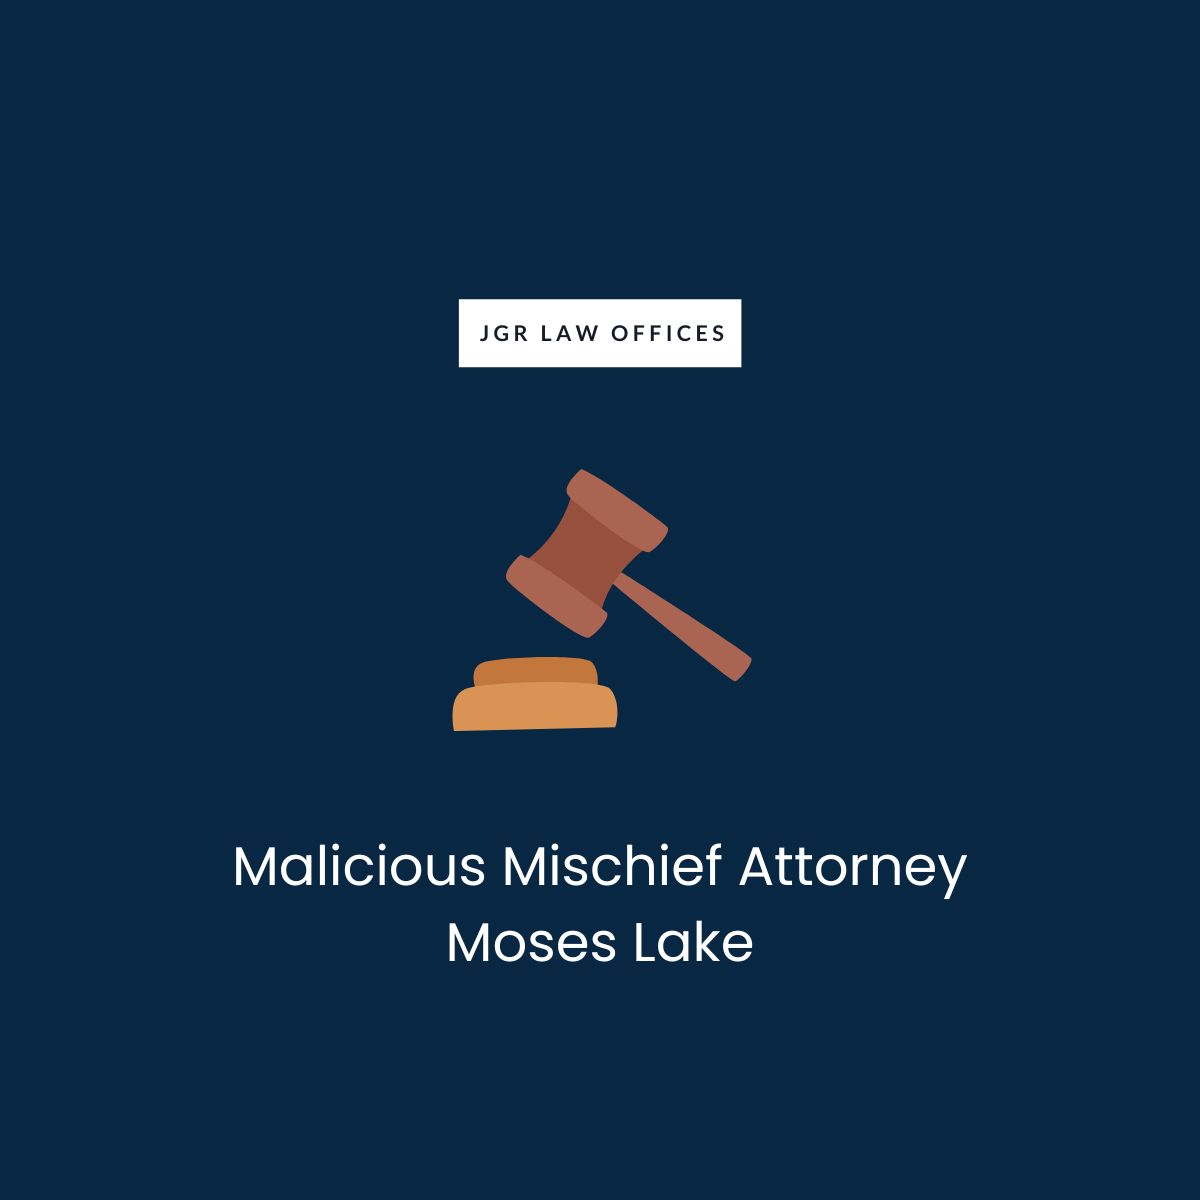 Malicious Mischief Attorney Moses Lake